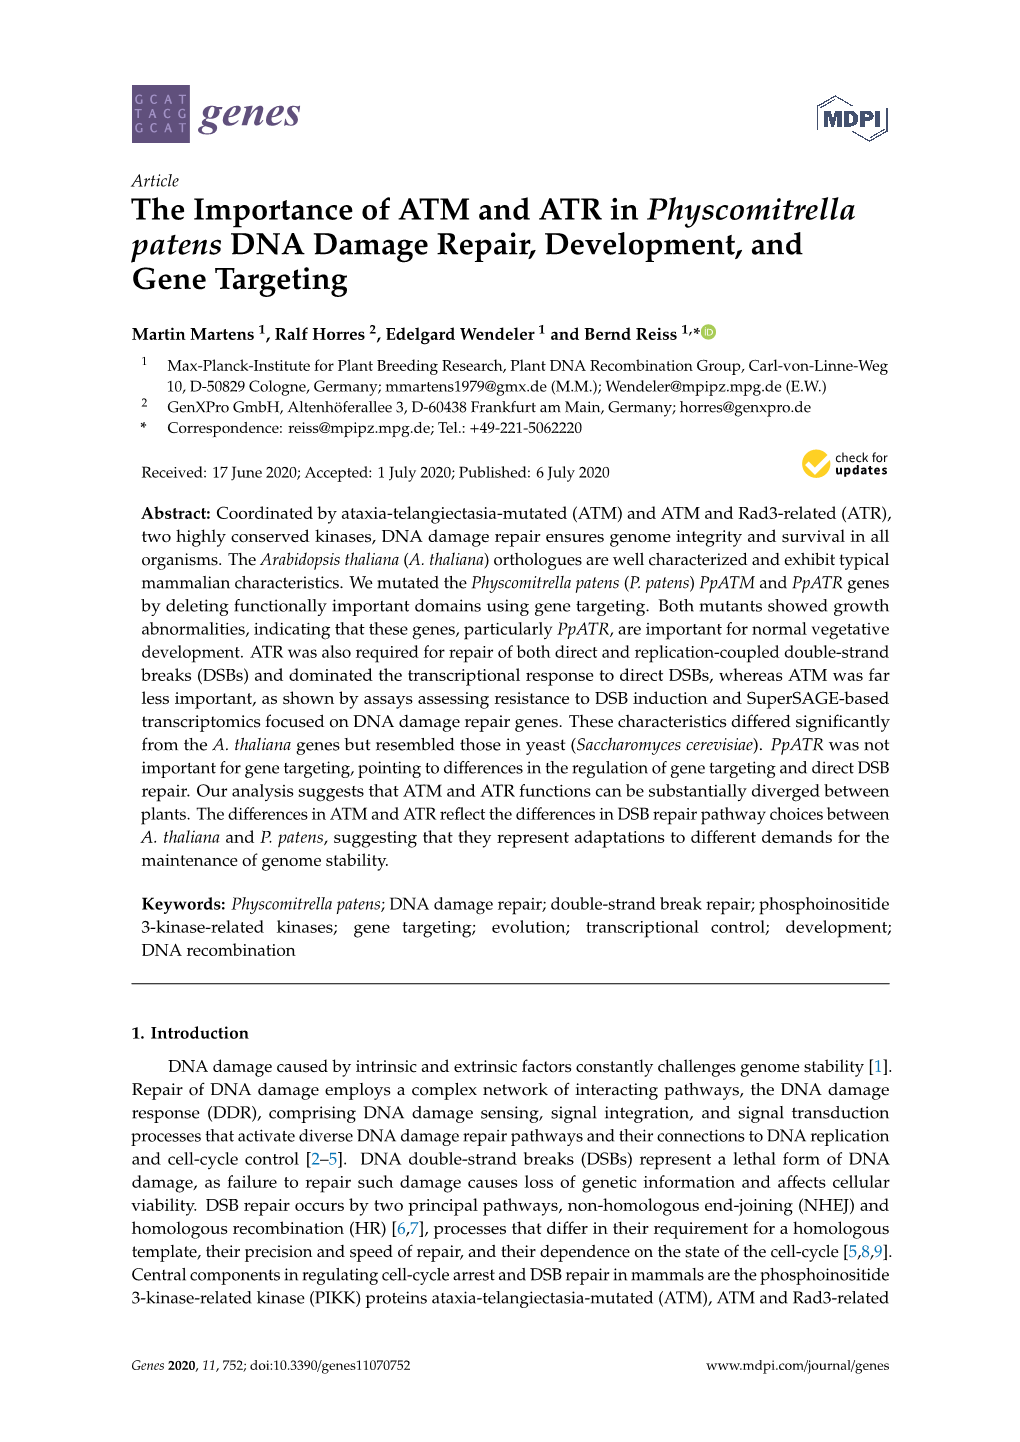 The Importance of ATM and ATR in Physcomitrella Patens DNA Damage Repair, Development, and Gene Targeting